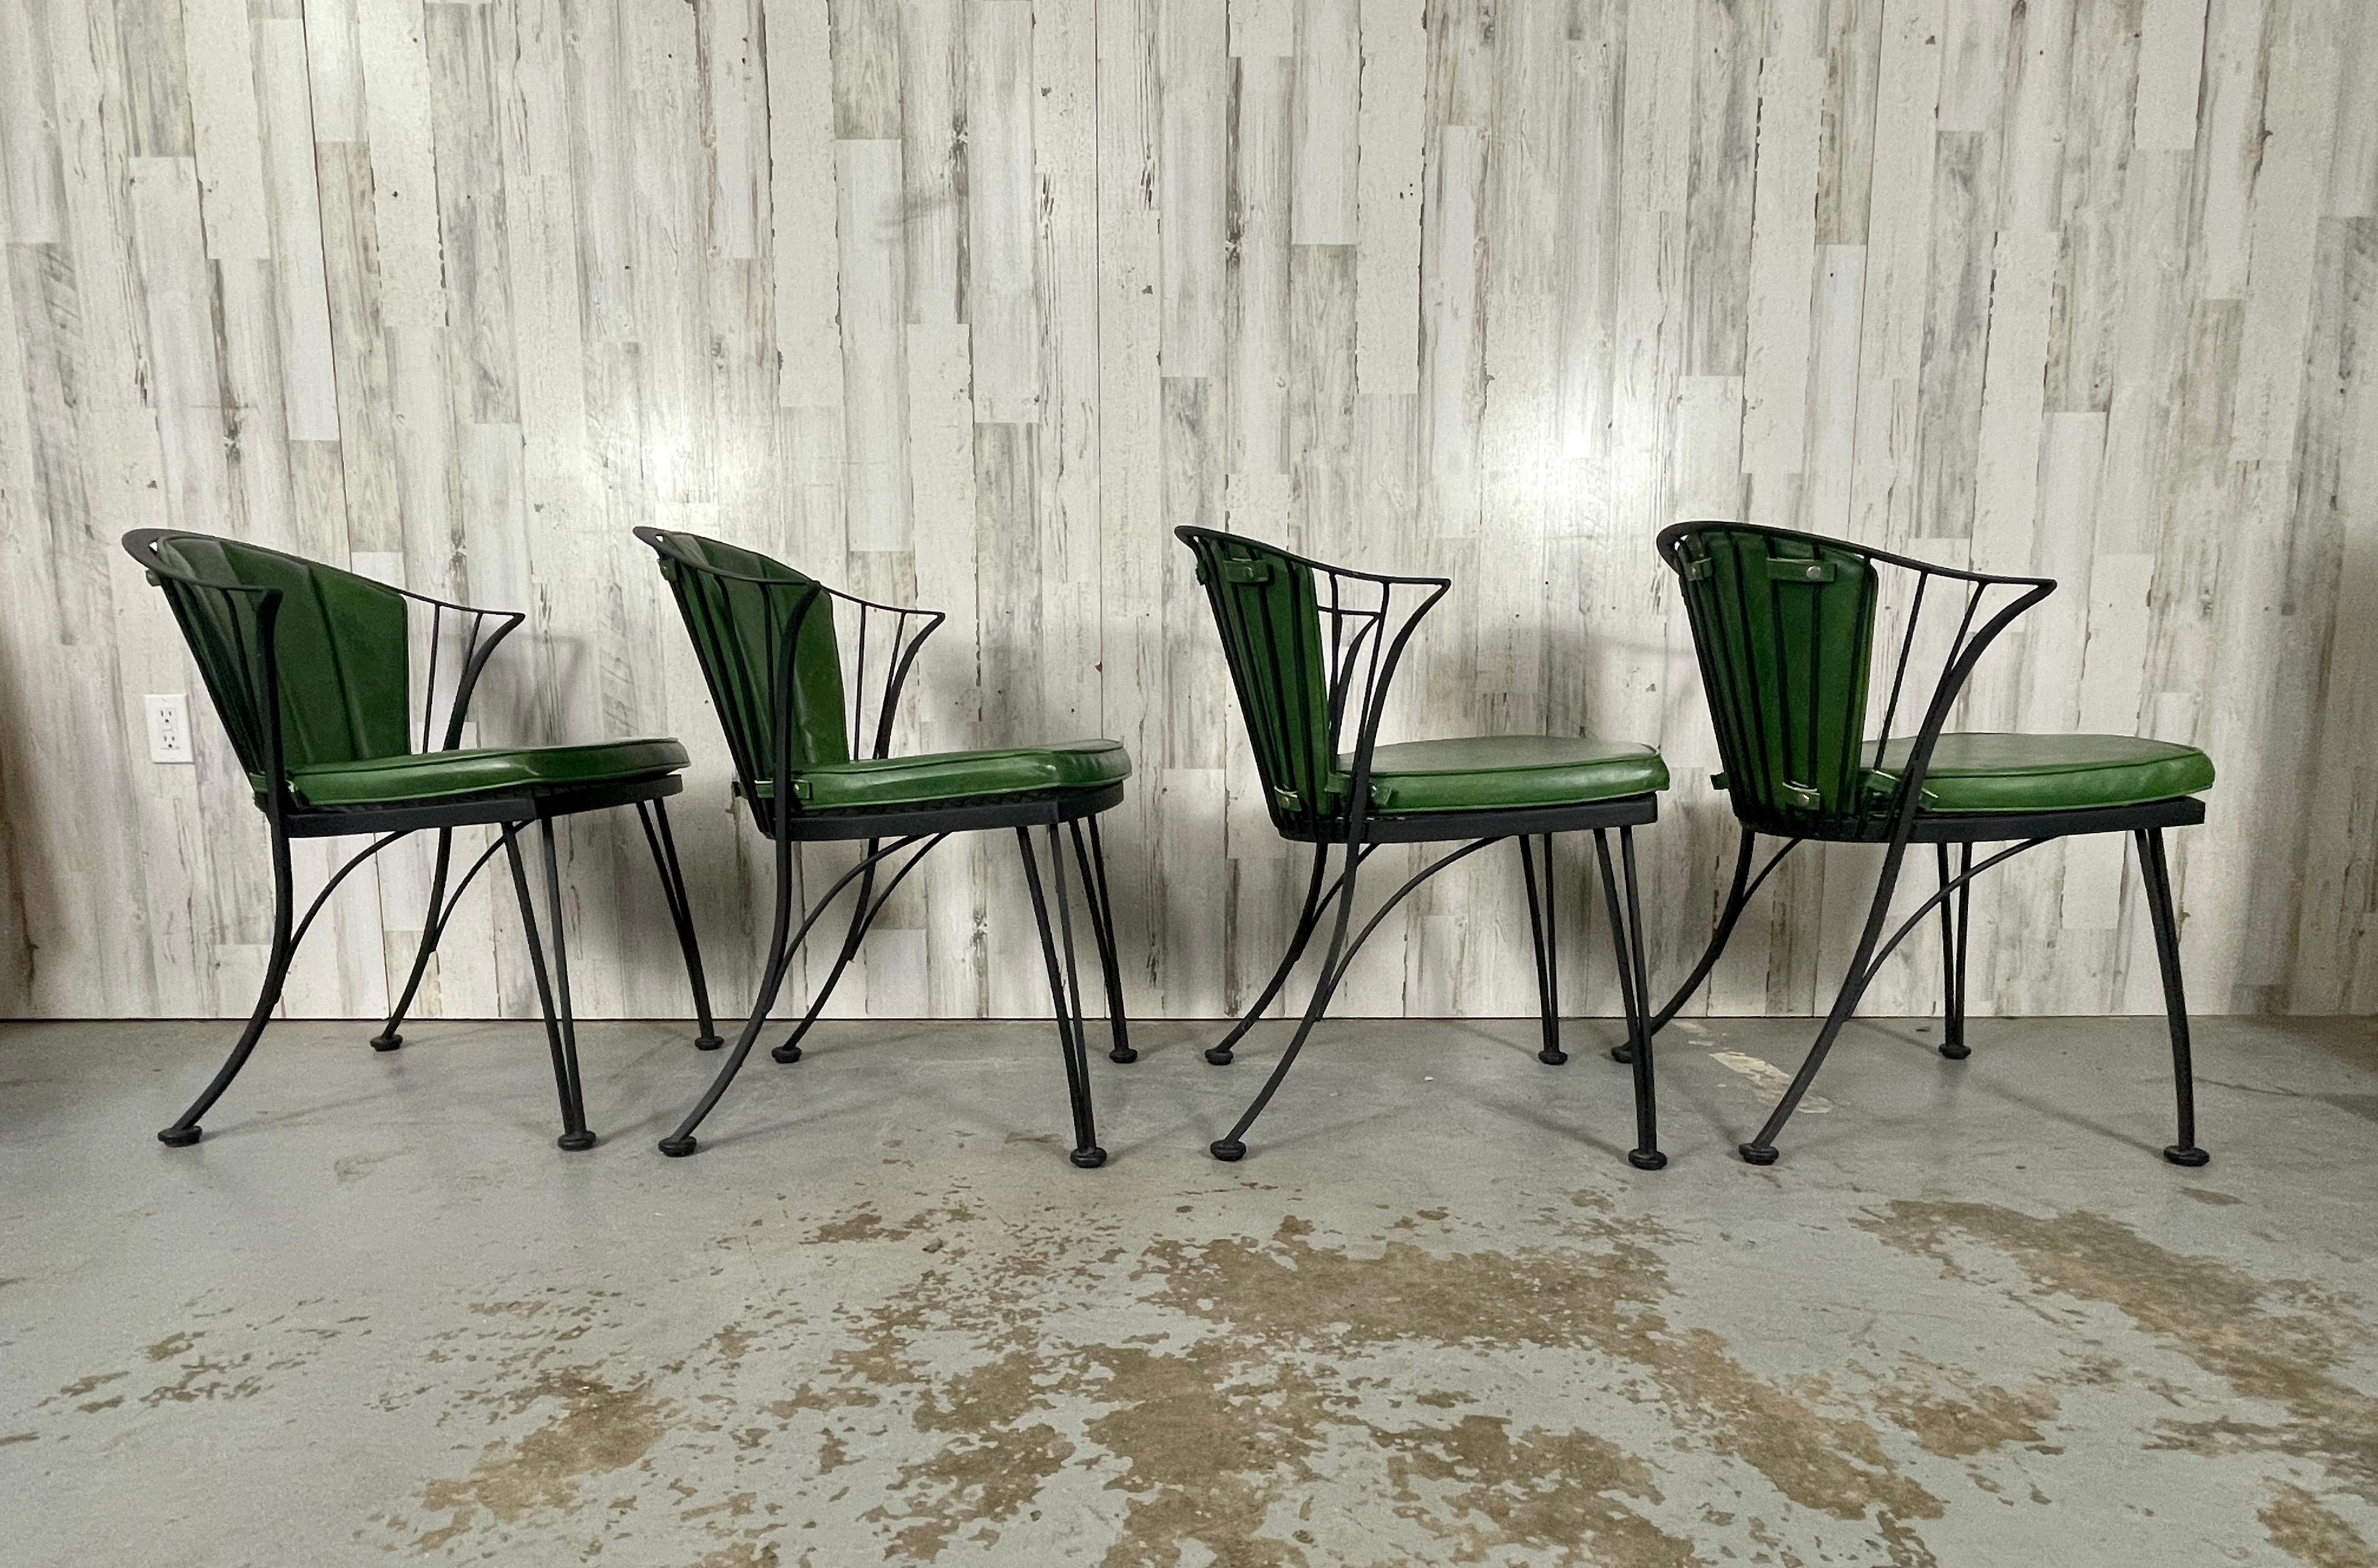  1950s wrought iron dining chairs by Woodard. The 'Pinecrest' line was one of their original designs in the 1950s. These chairs have a very attractive curved backs and legs. Faux leather green cushions give these chairs extra comfort. These chairs